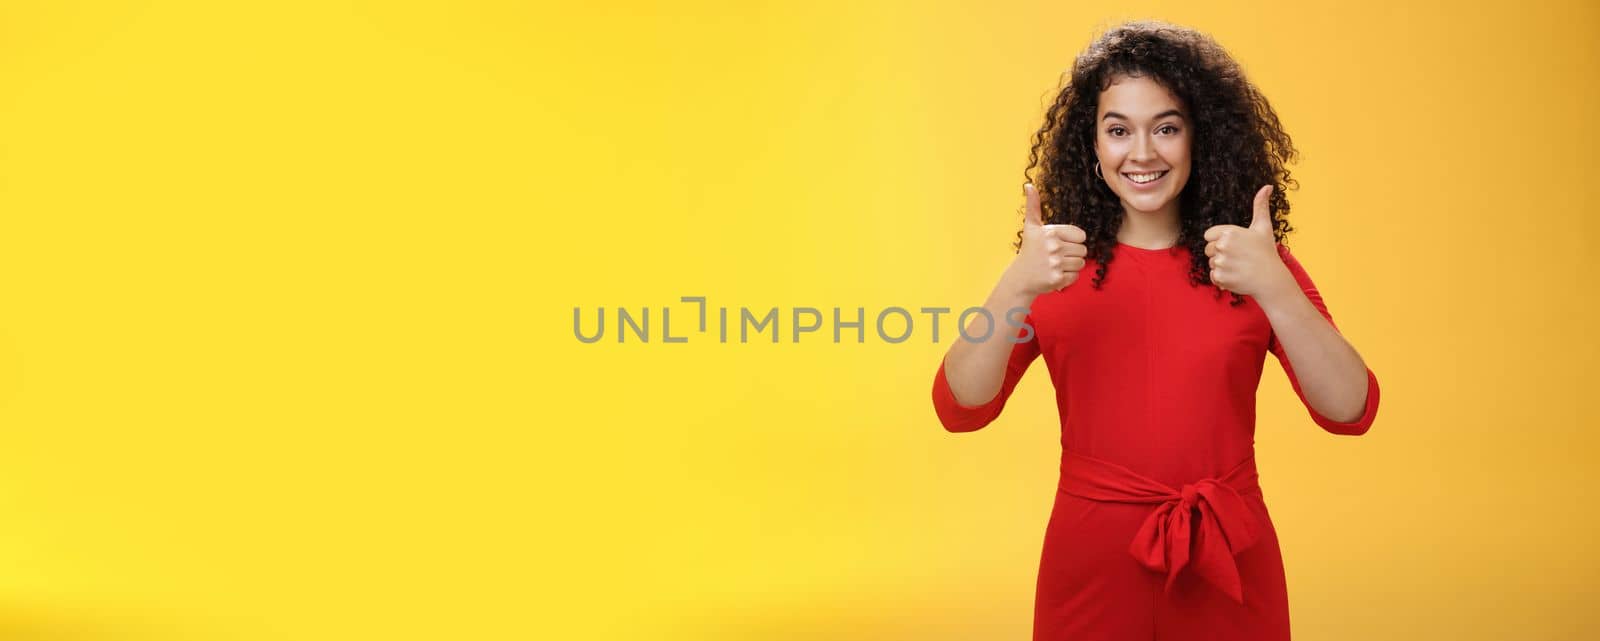 Excellent idea, nice job. Portrait of supportive delighted and happy charming female friend showing thumbs up as standing in red dress over yellow wall smiling giving positive reply, liking concept.